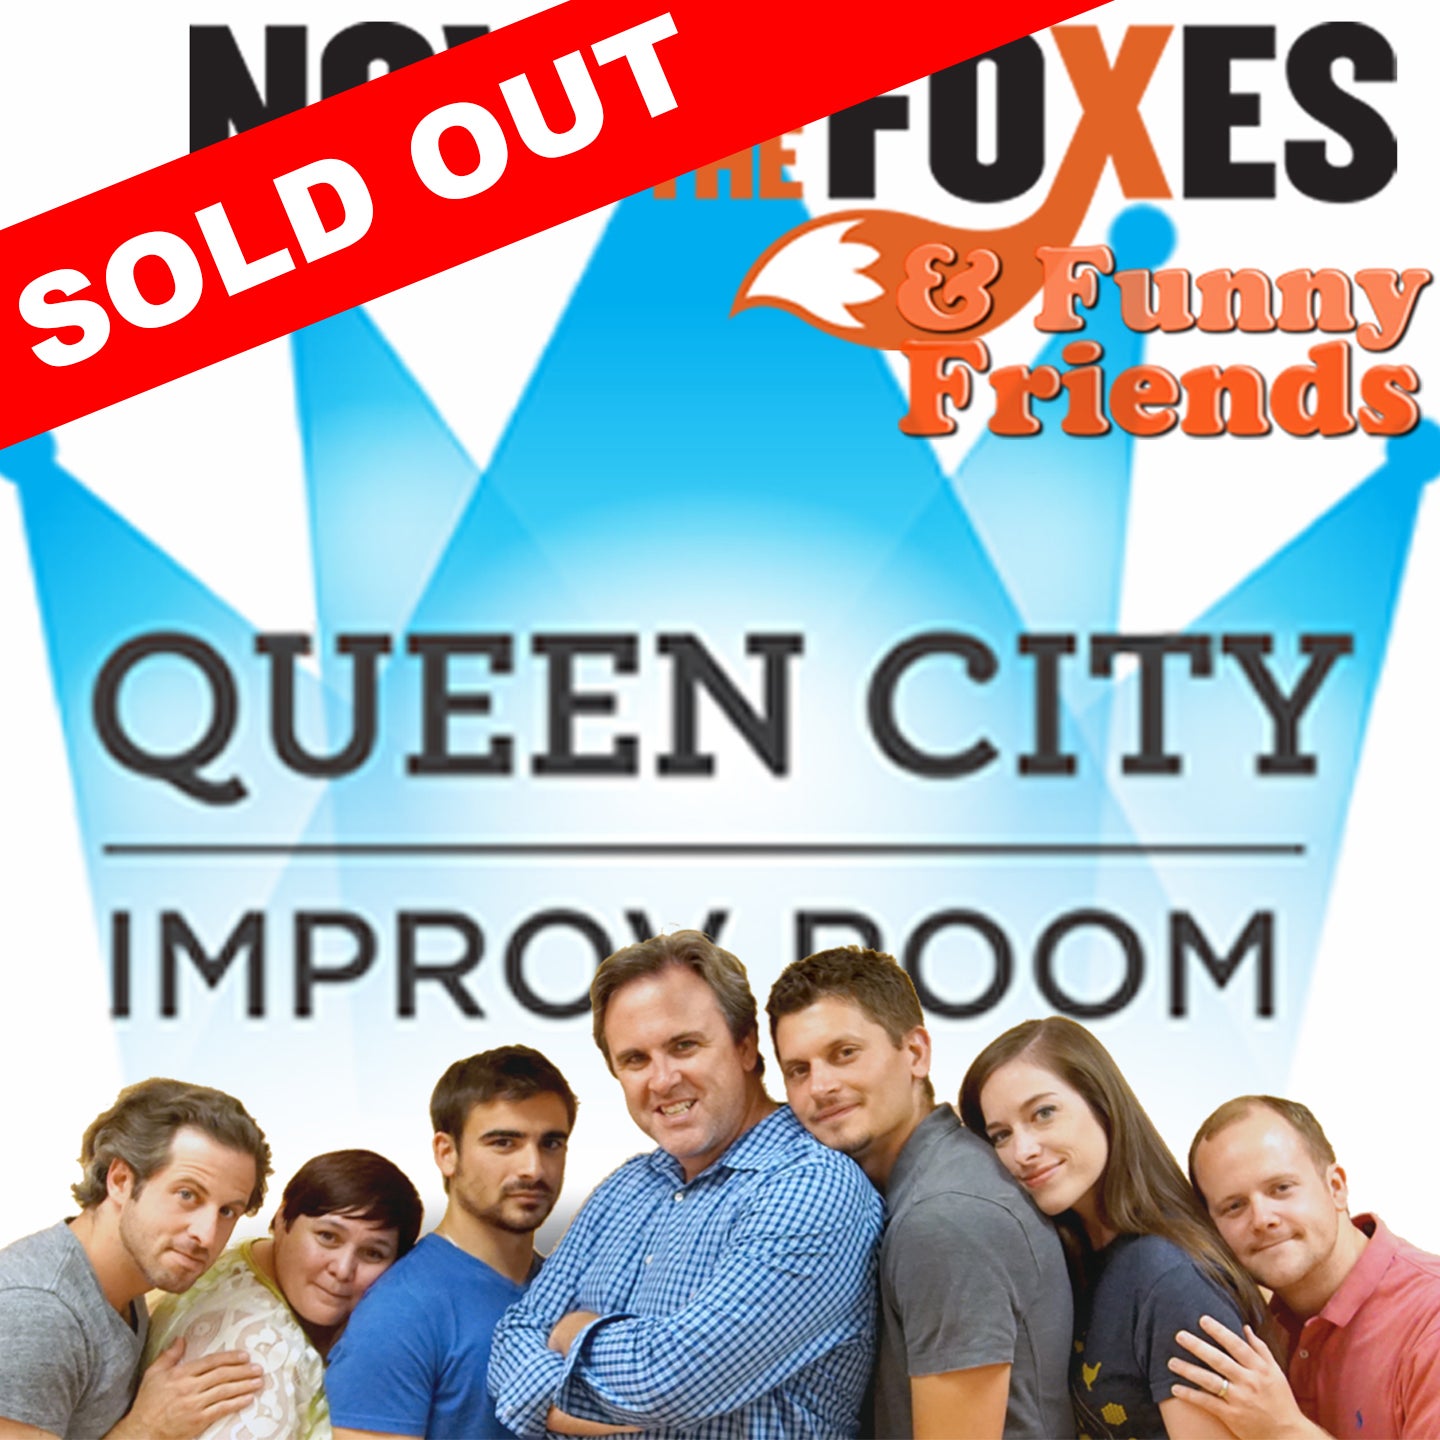 Queen City Improv Room: Foxes & Funny Friends